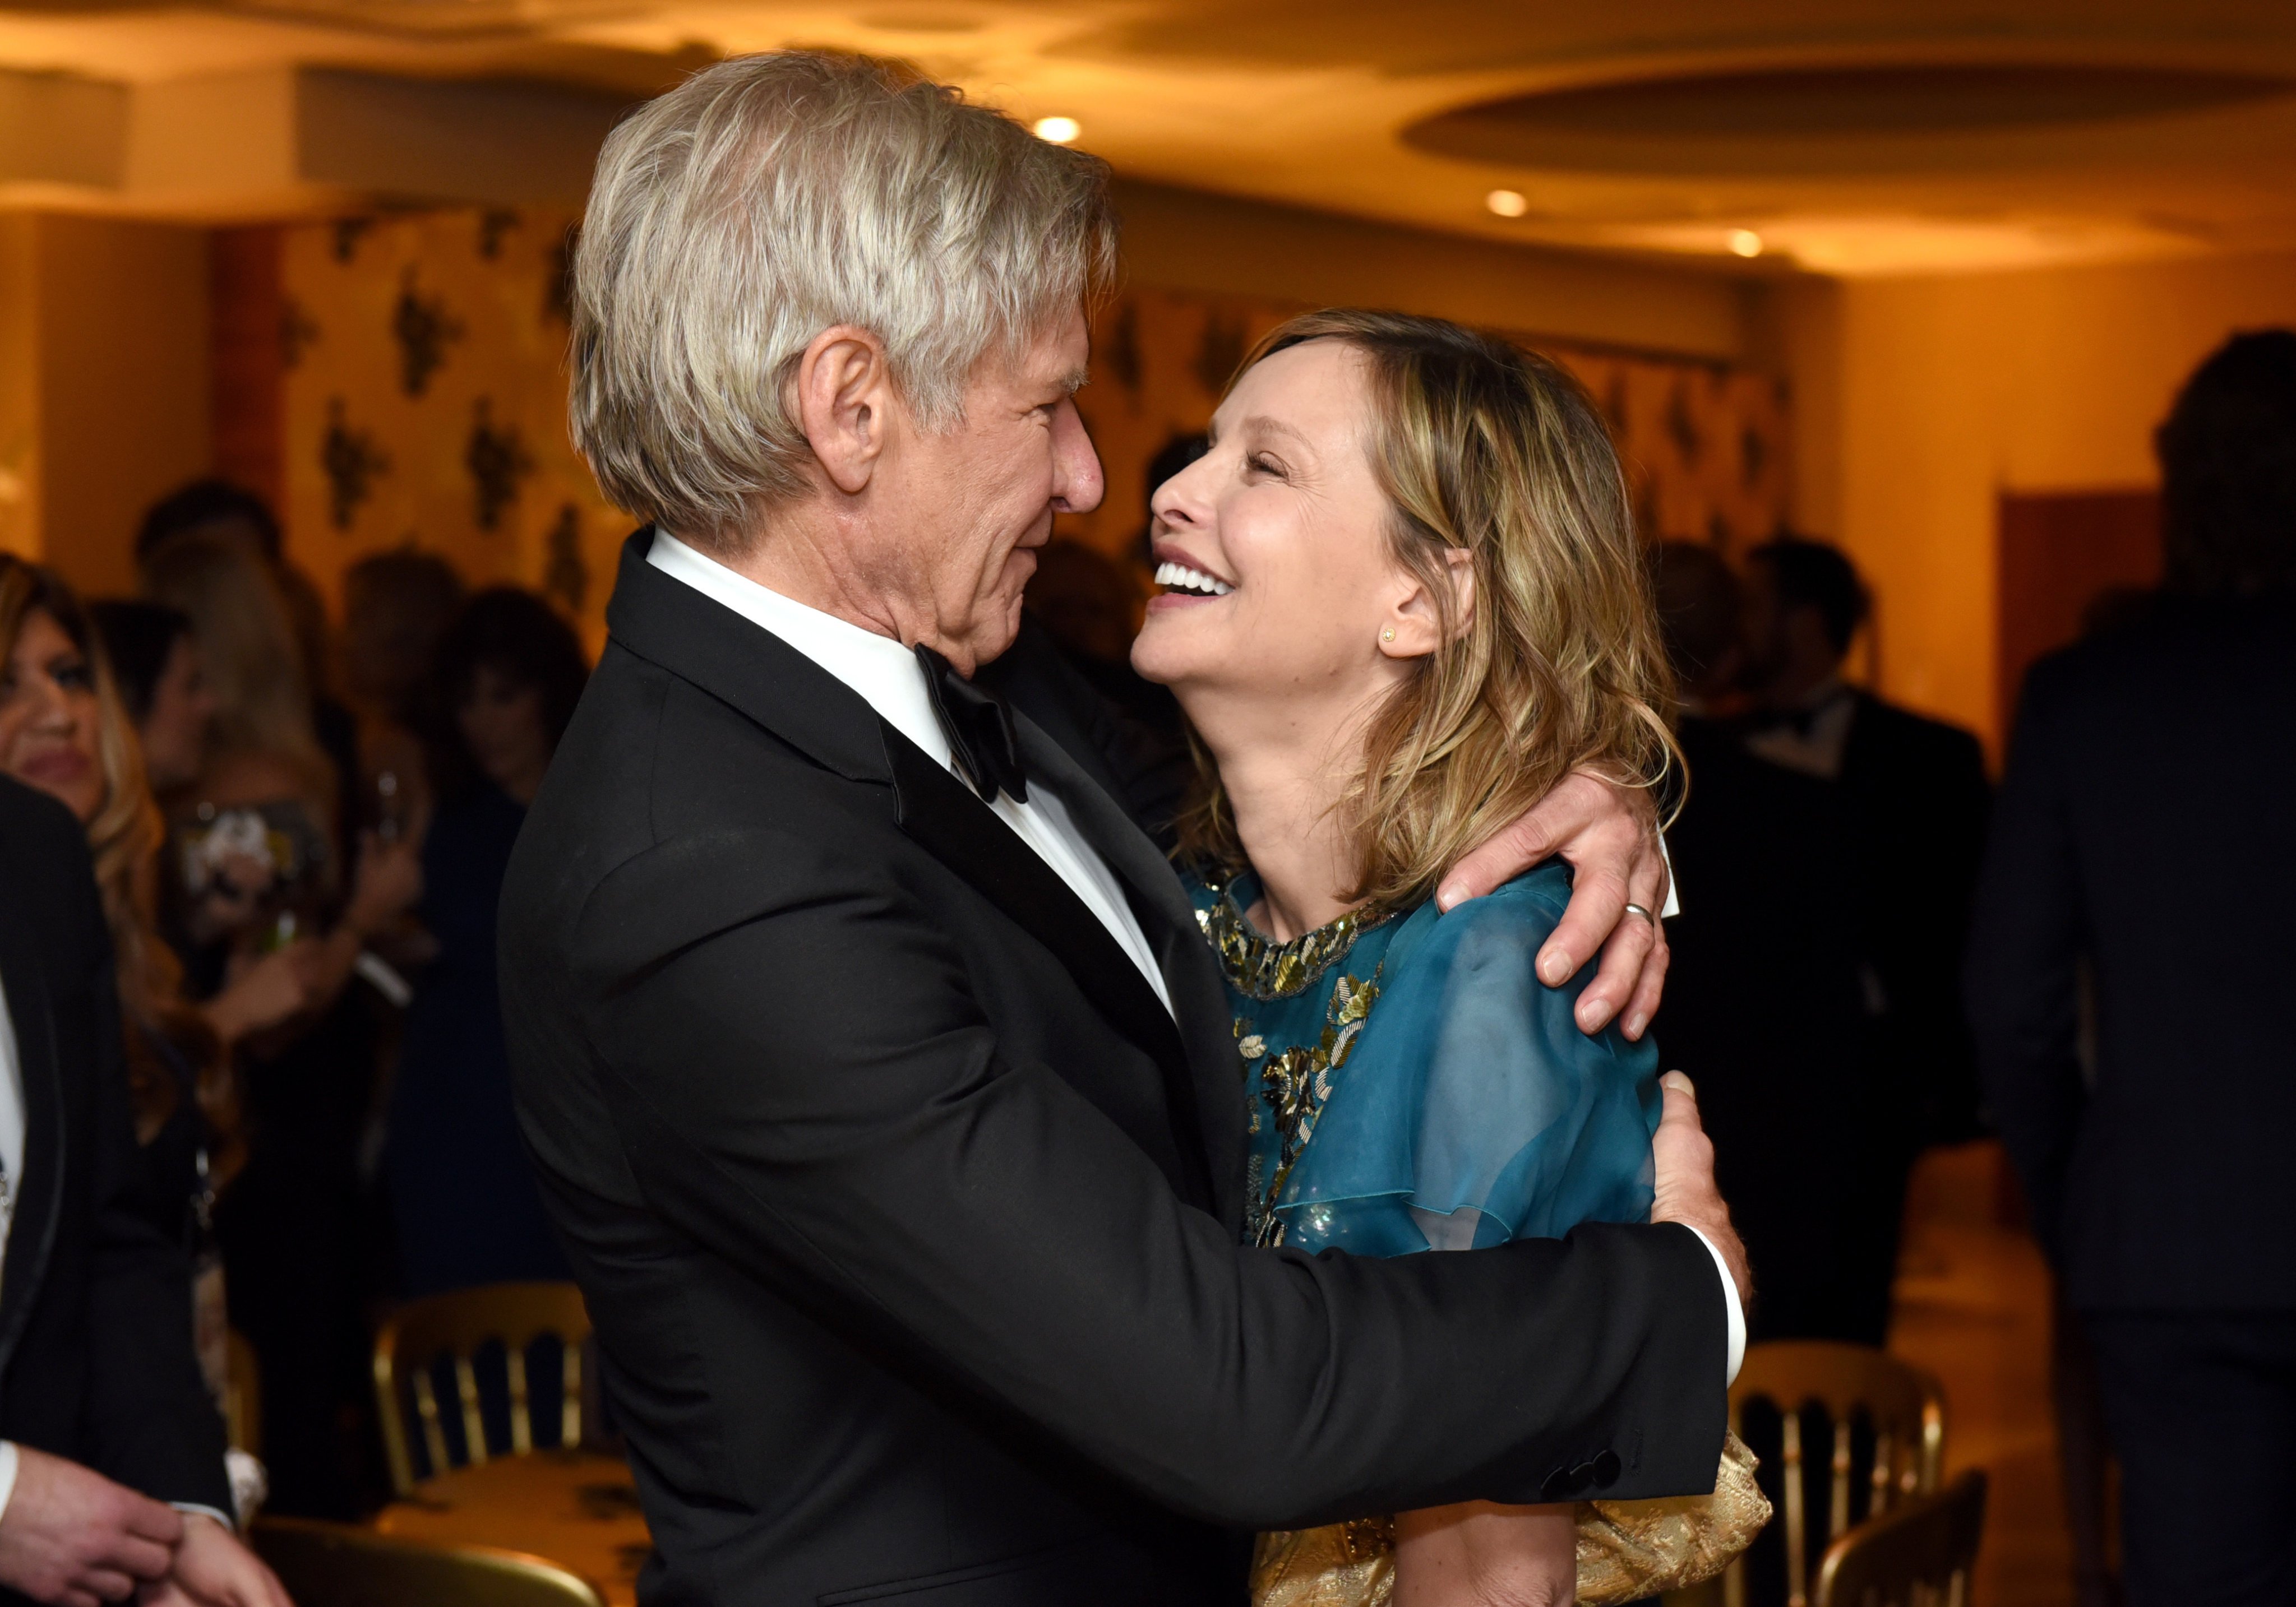 Actors Harrison Ford (L) and Calista Flockhart attend HBO’s Official Golden Globe Awards After Party at The Beverly Hilton Hotel on January 10, 2016 in Beverly Hills, California. Photo: FilmMagic
